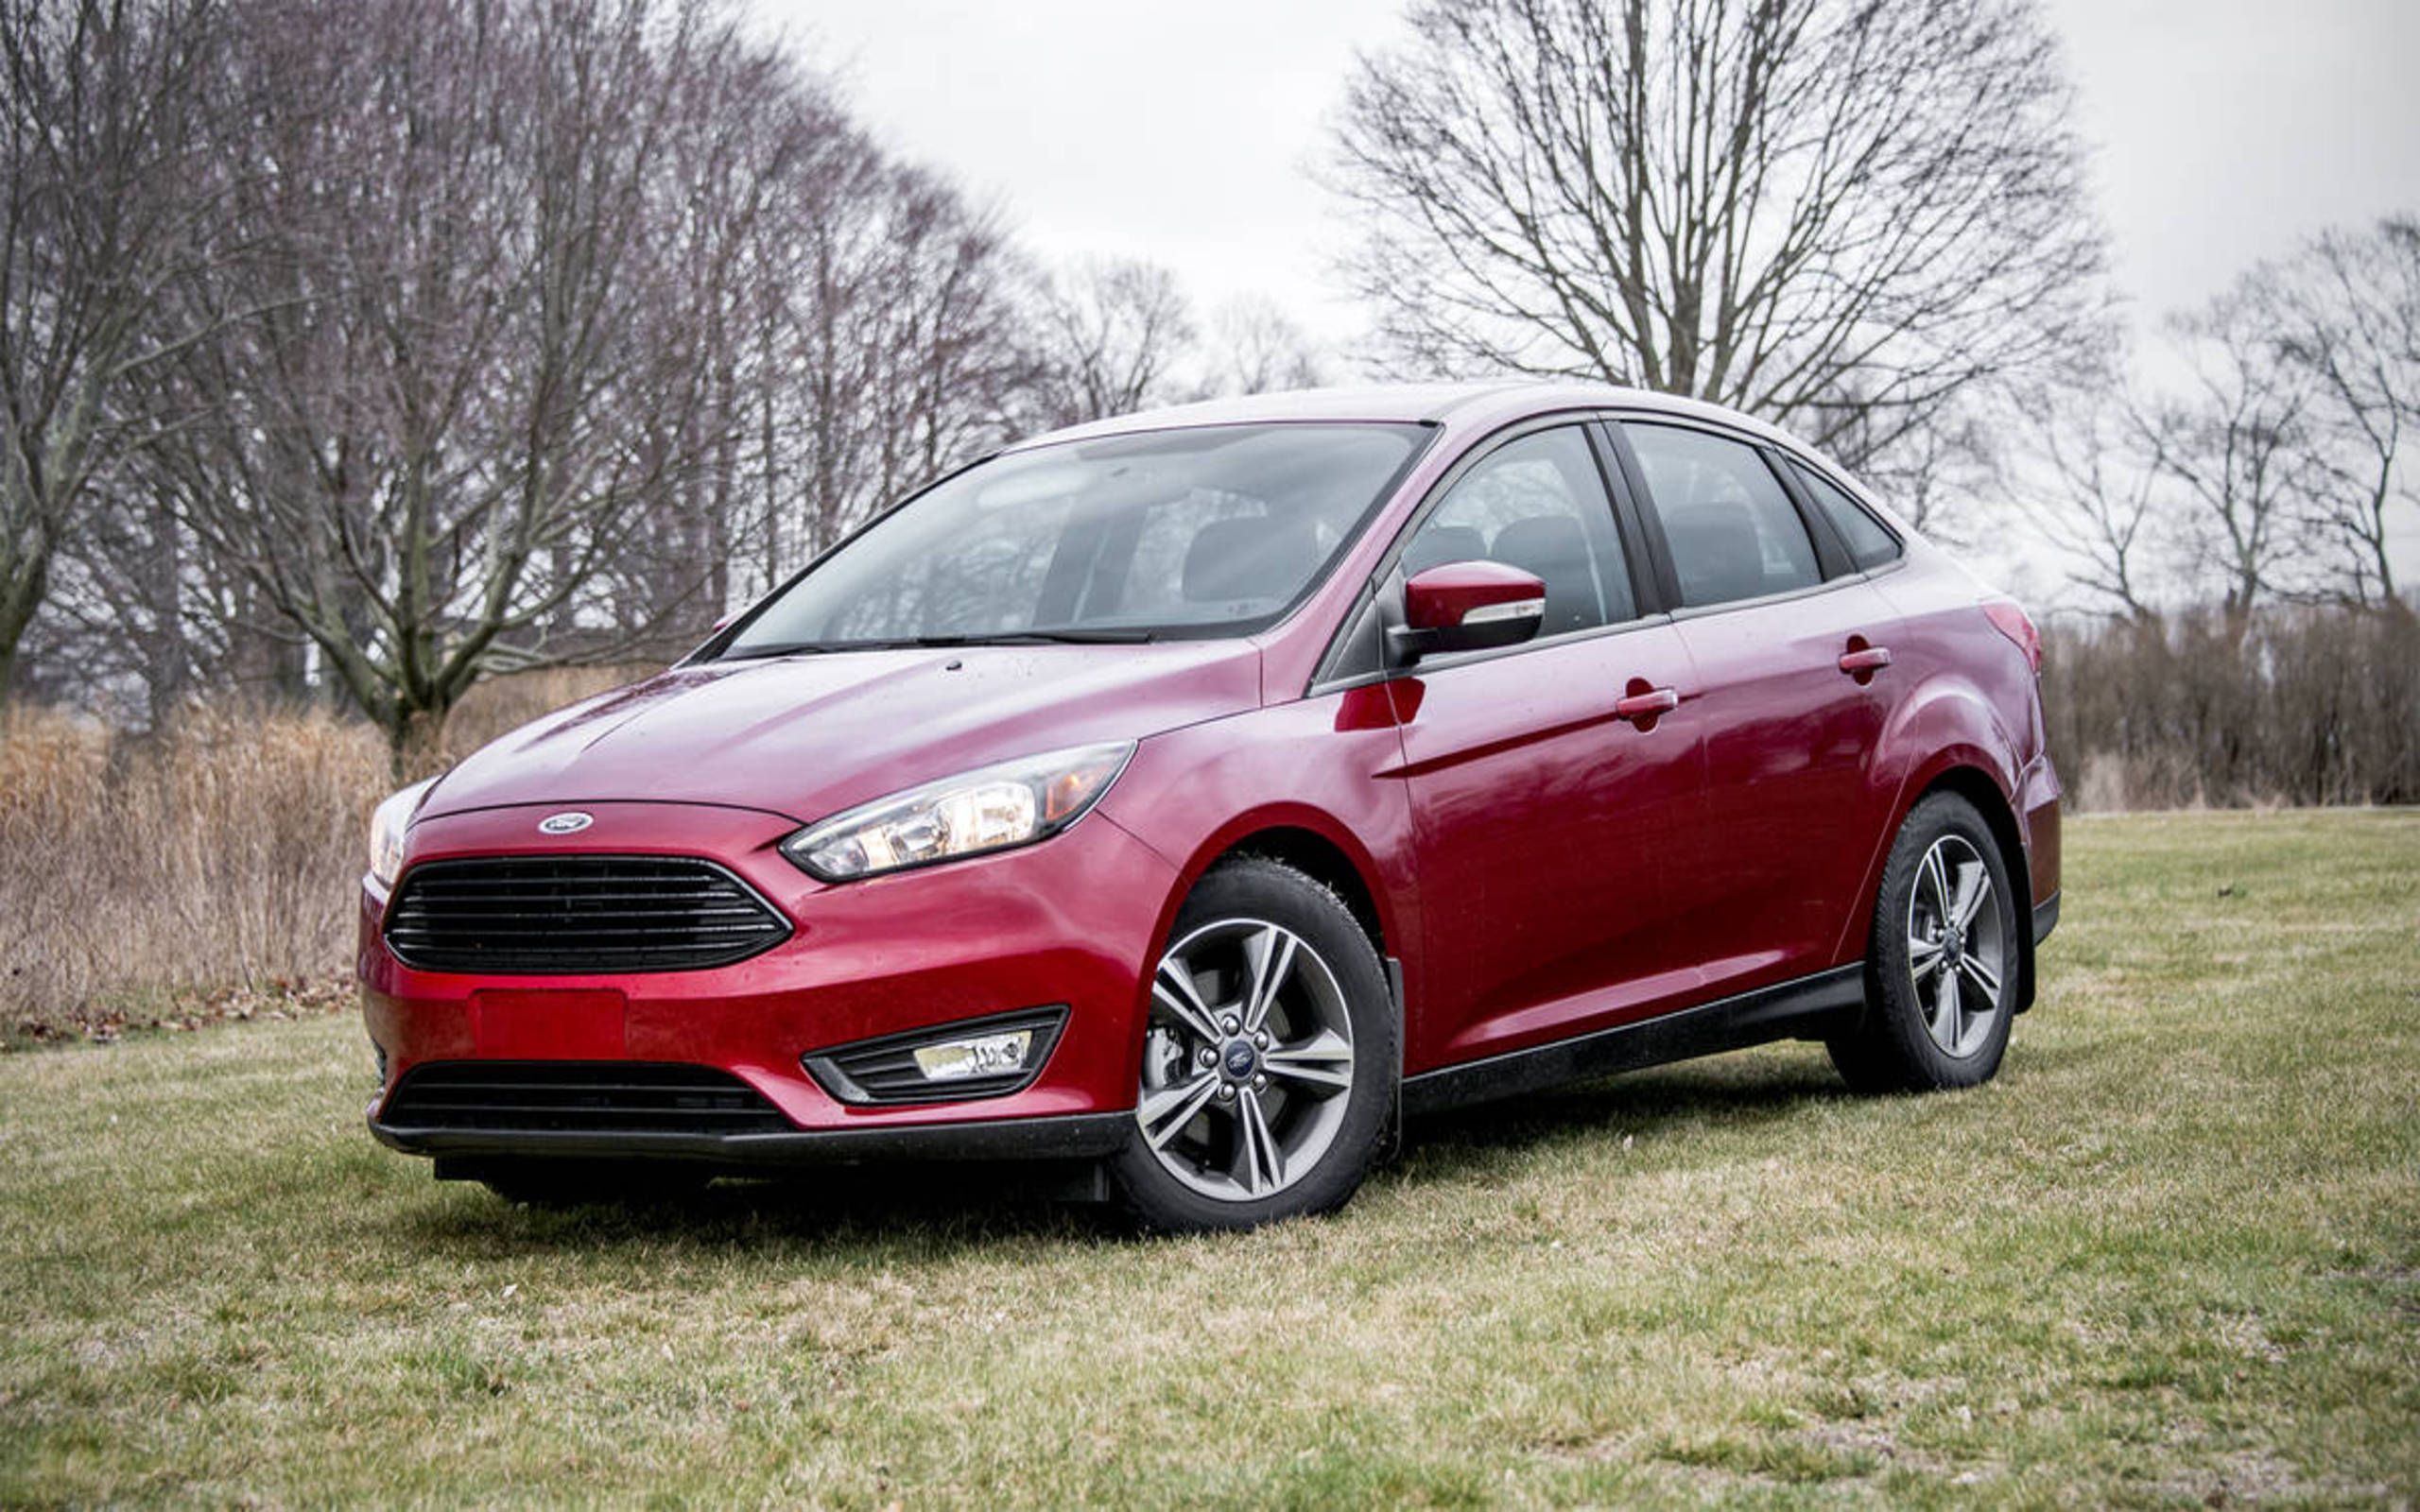 Ford will build the next-gen Focus sedan in China